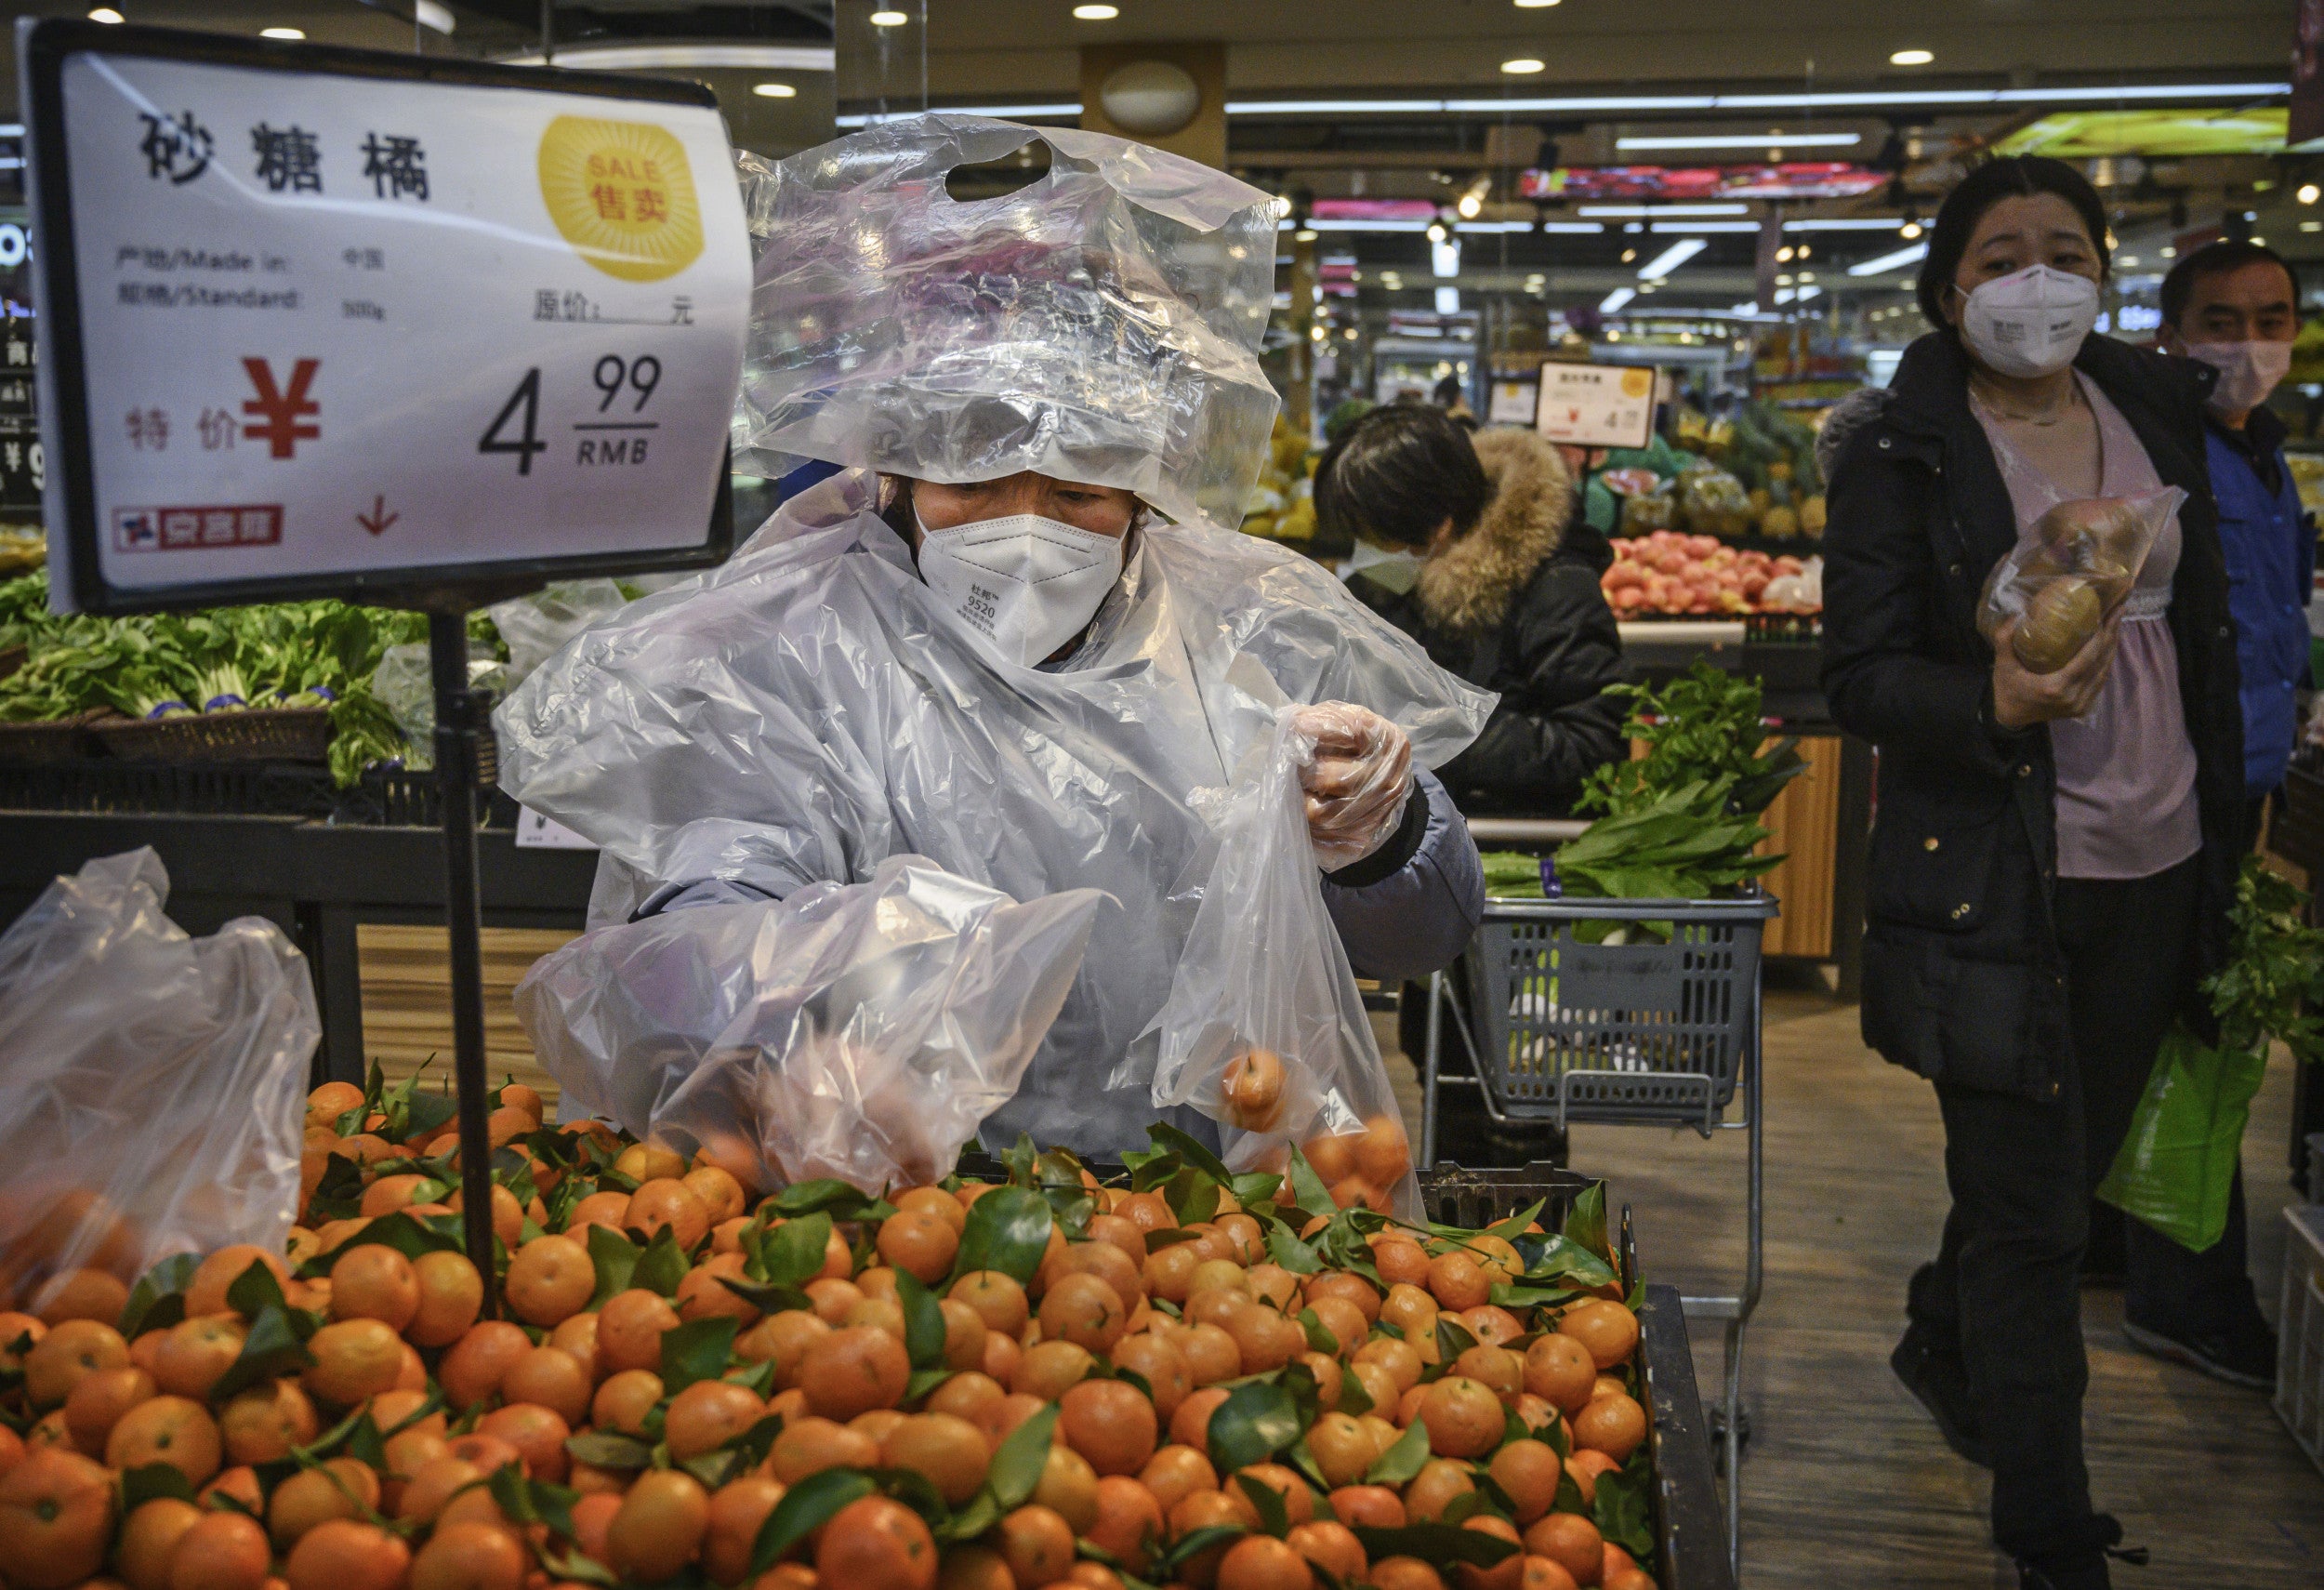 A person shopping for groceries during COVID-19